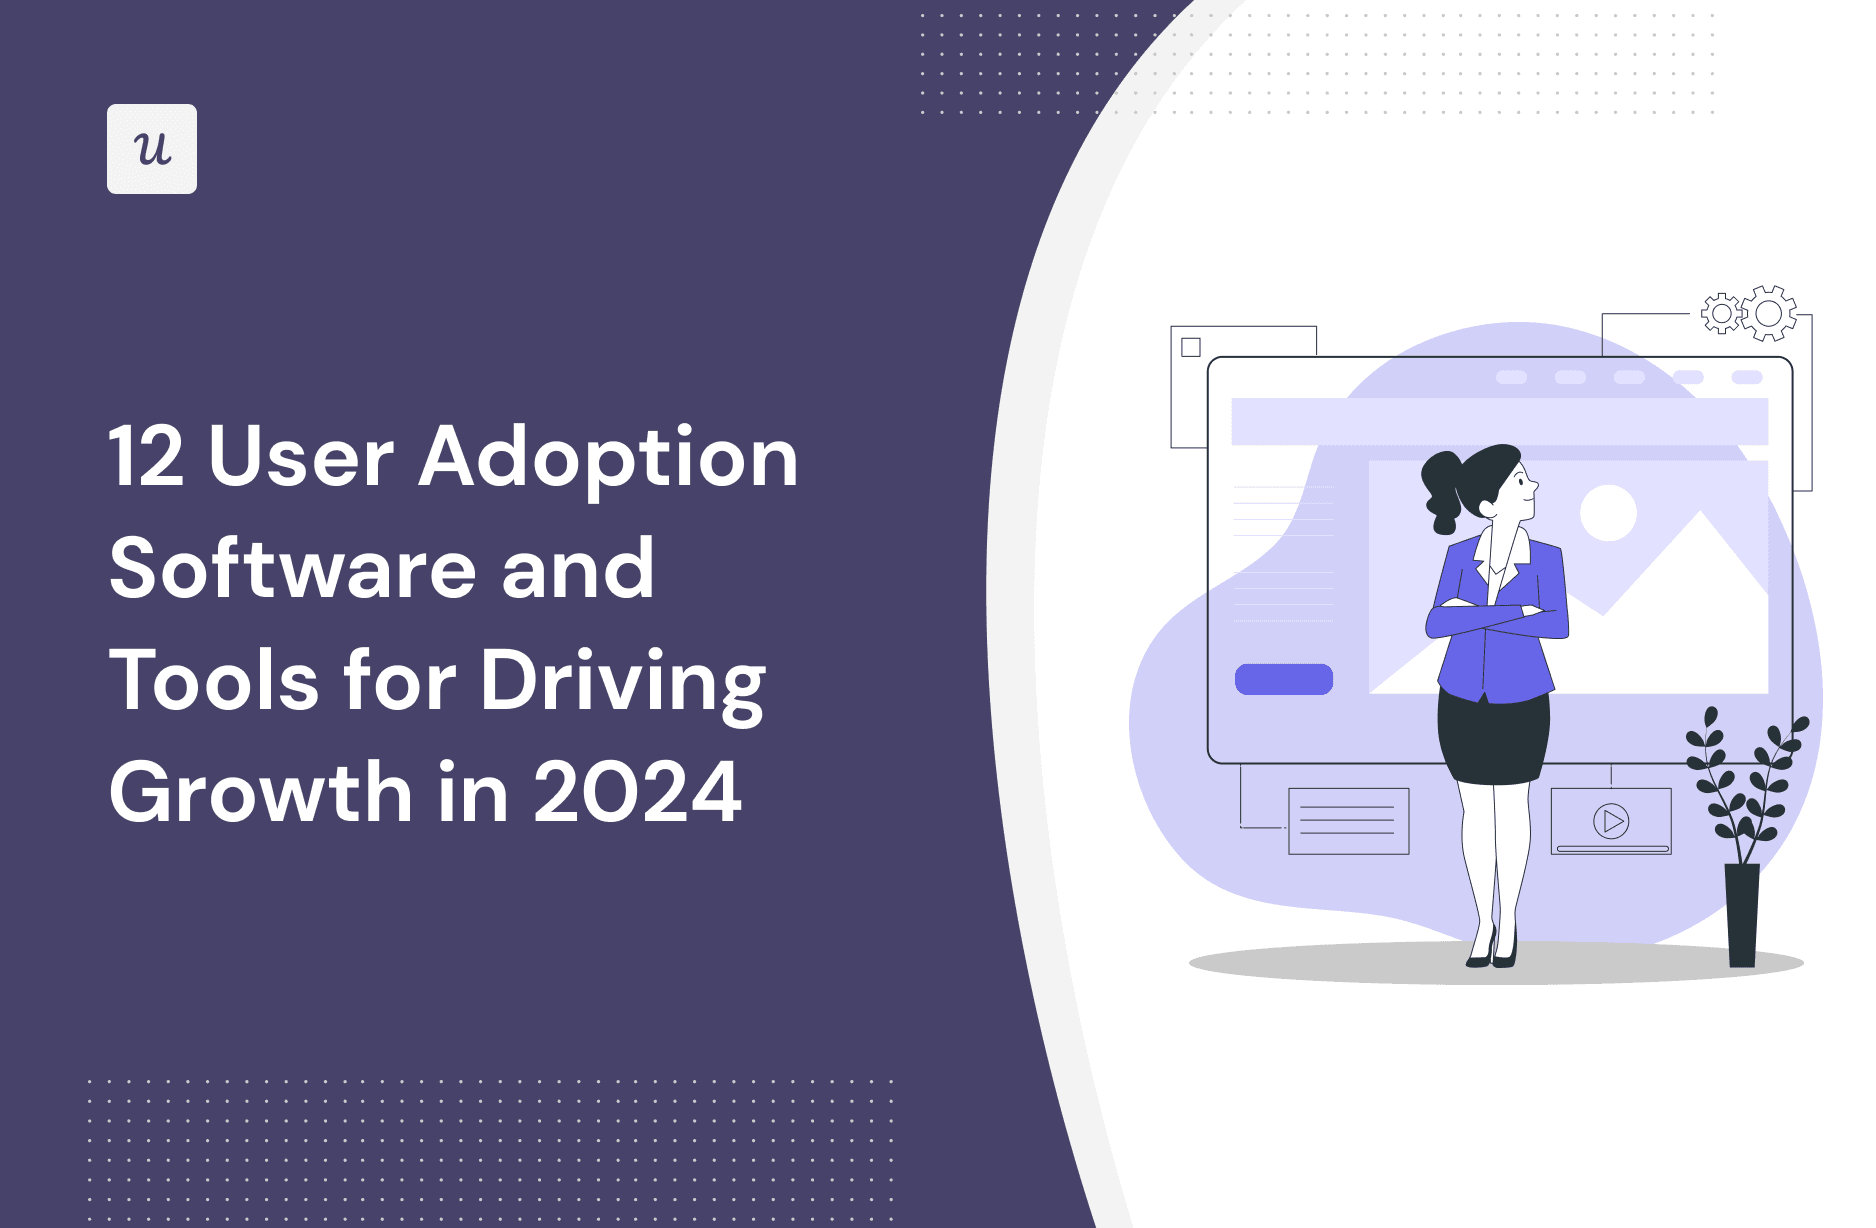 12 User Adoption Software and Tools for Driving Growth in 2024 cover